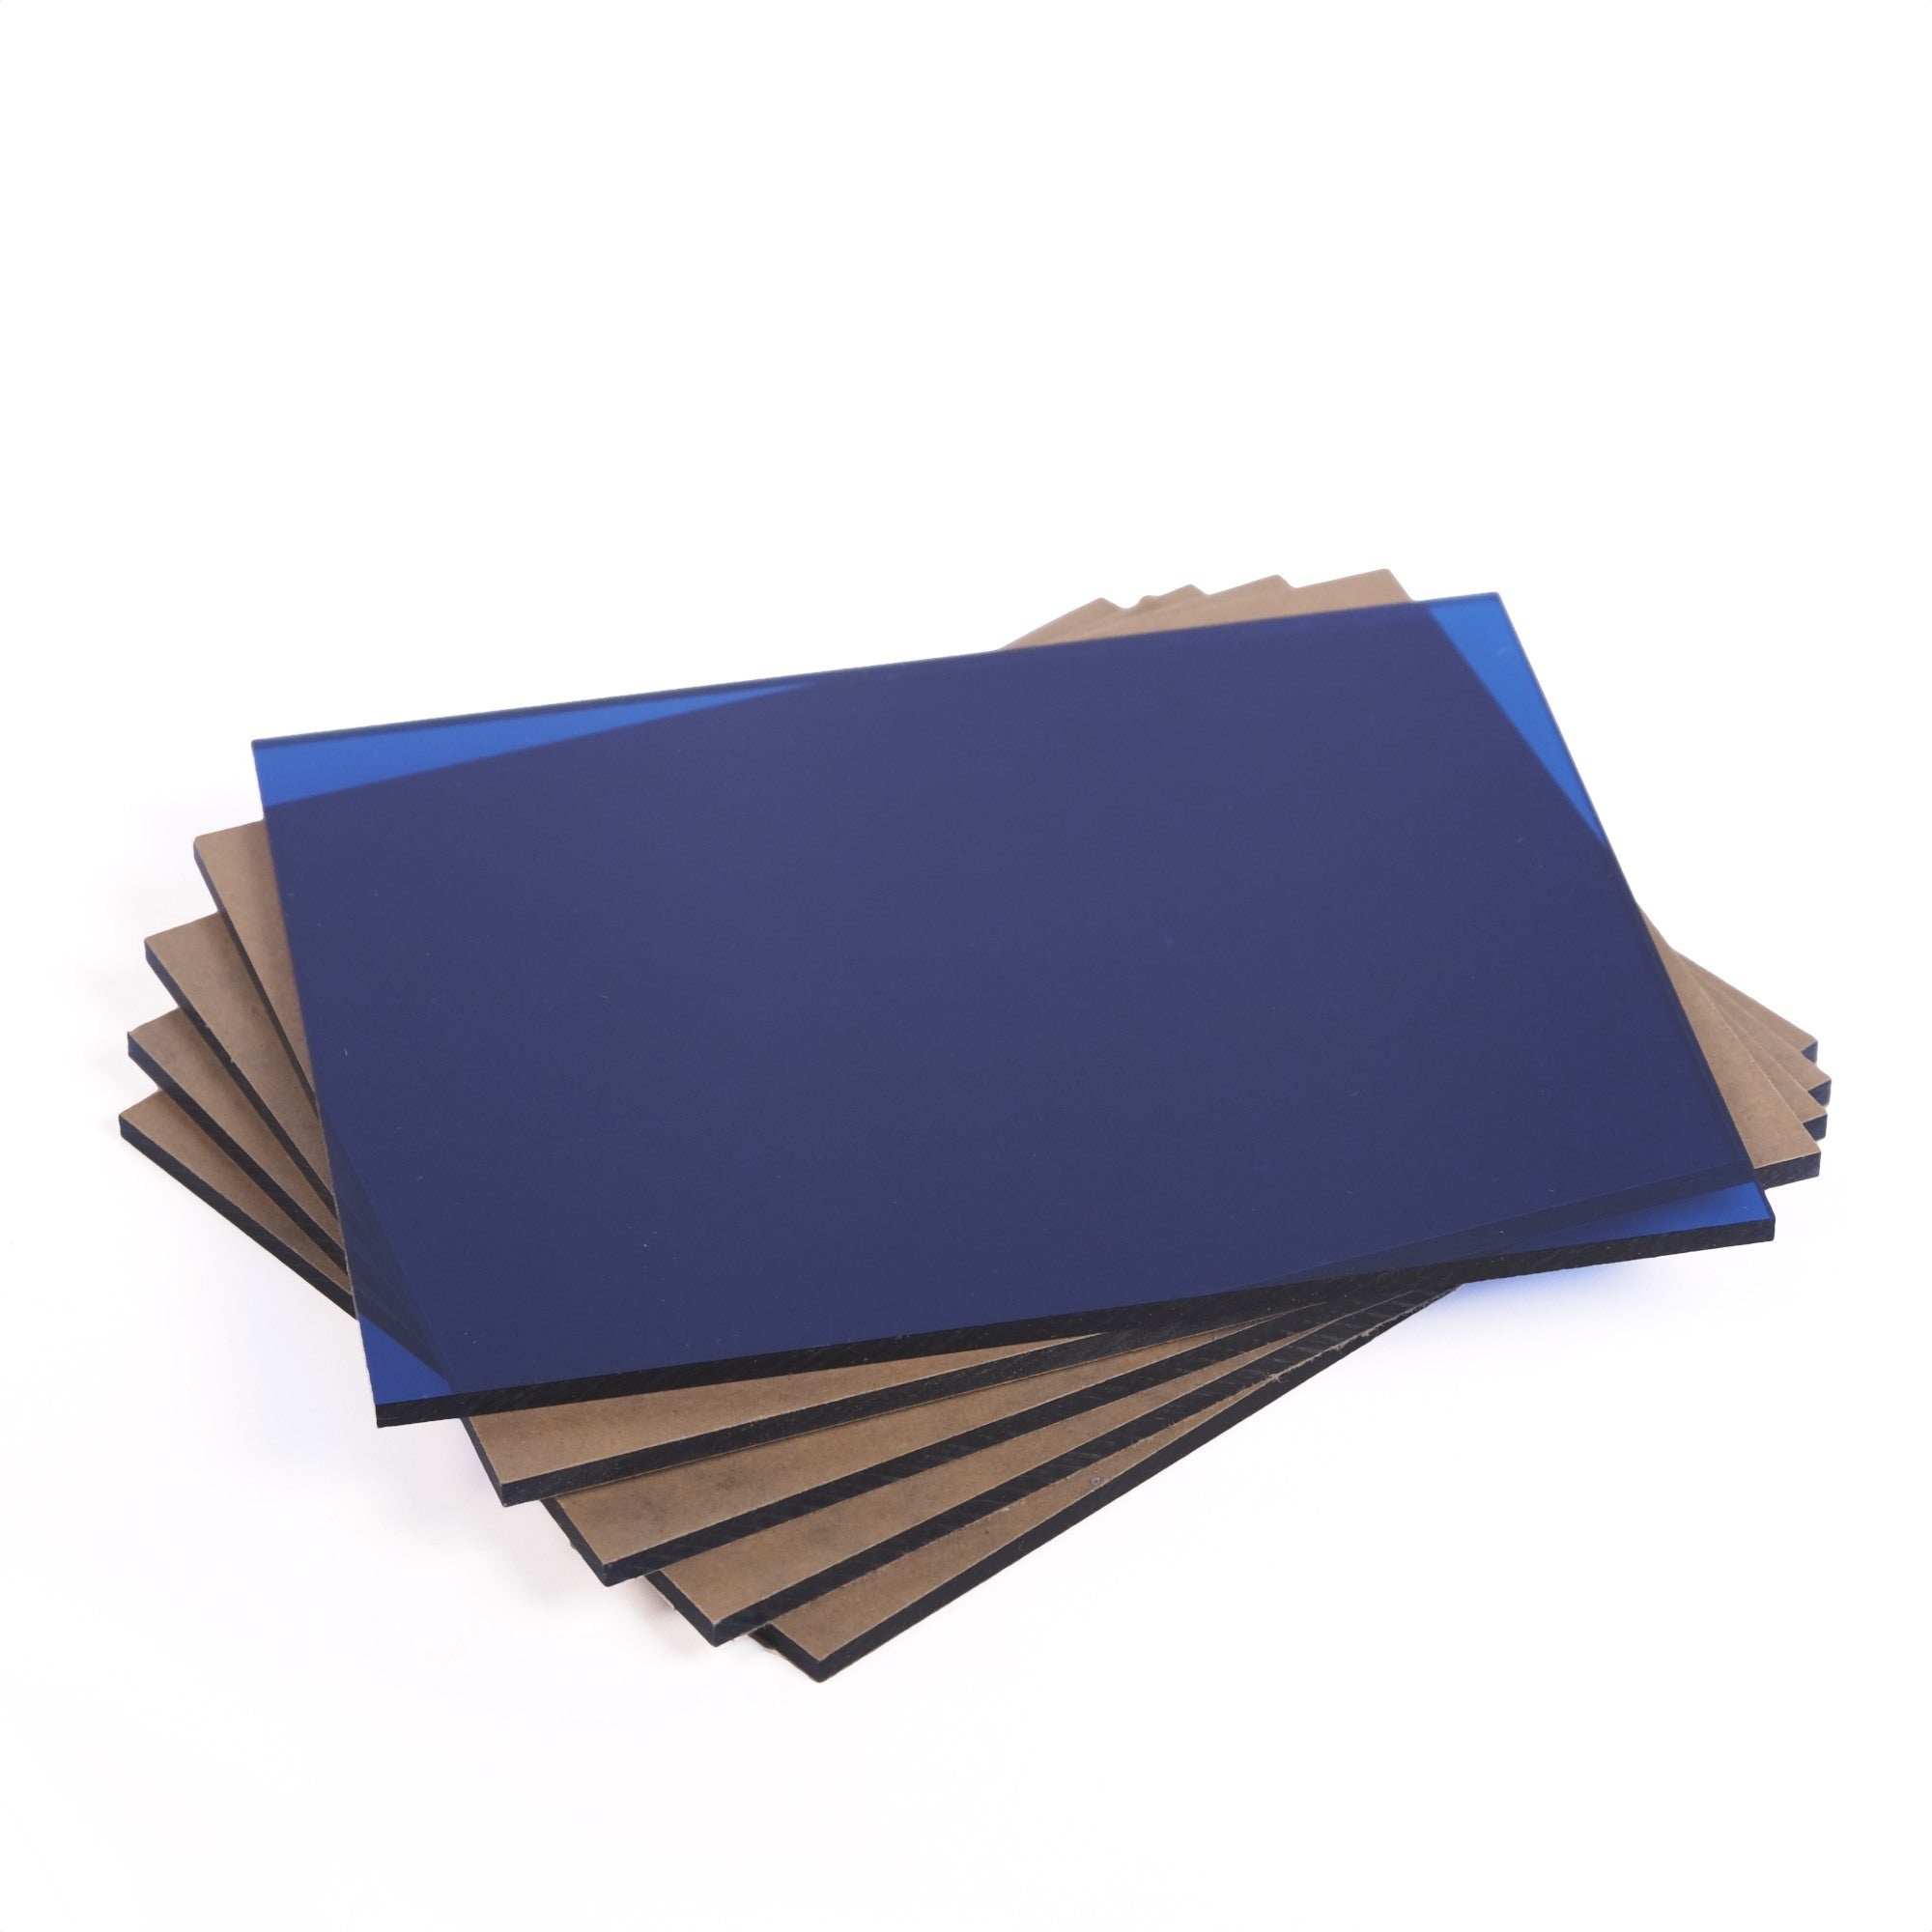 3mm Black Acrylic Sheet Manufacturers, Fournisseurs - Customized